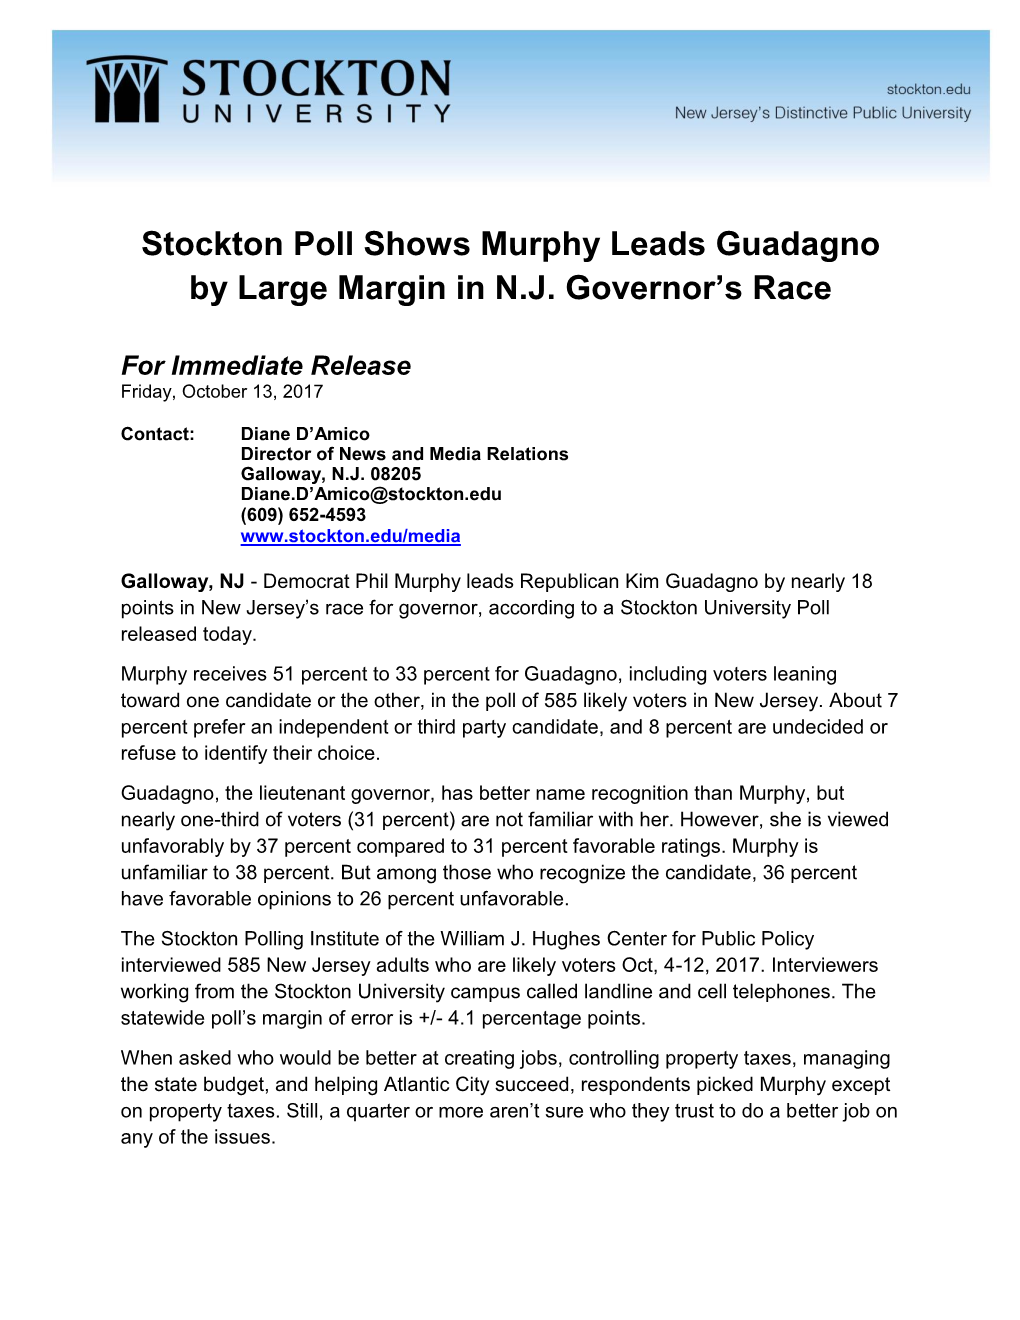 Stockton Poll Shows Murphy Leads Guadagno by Large Margin in N.J. Governor’S Race